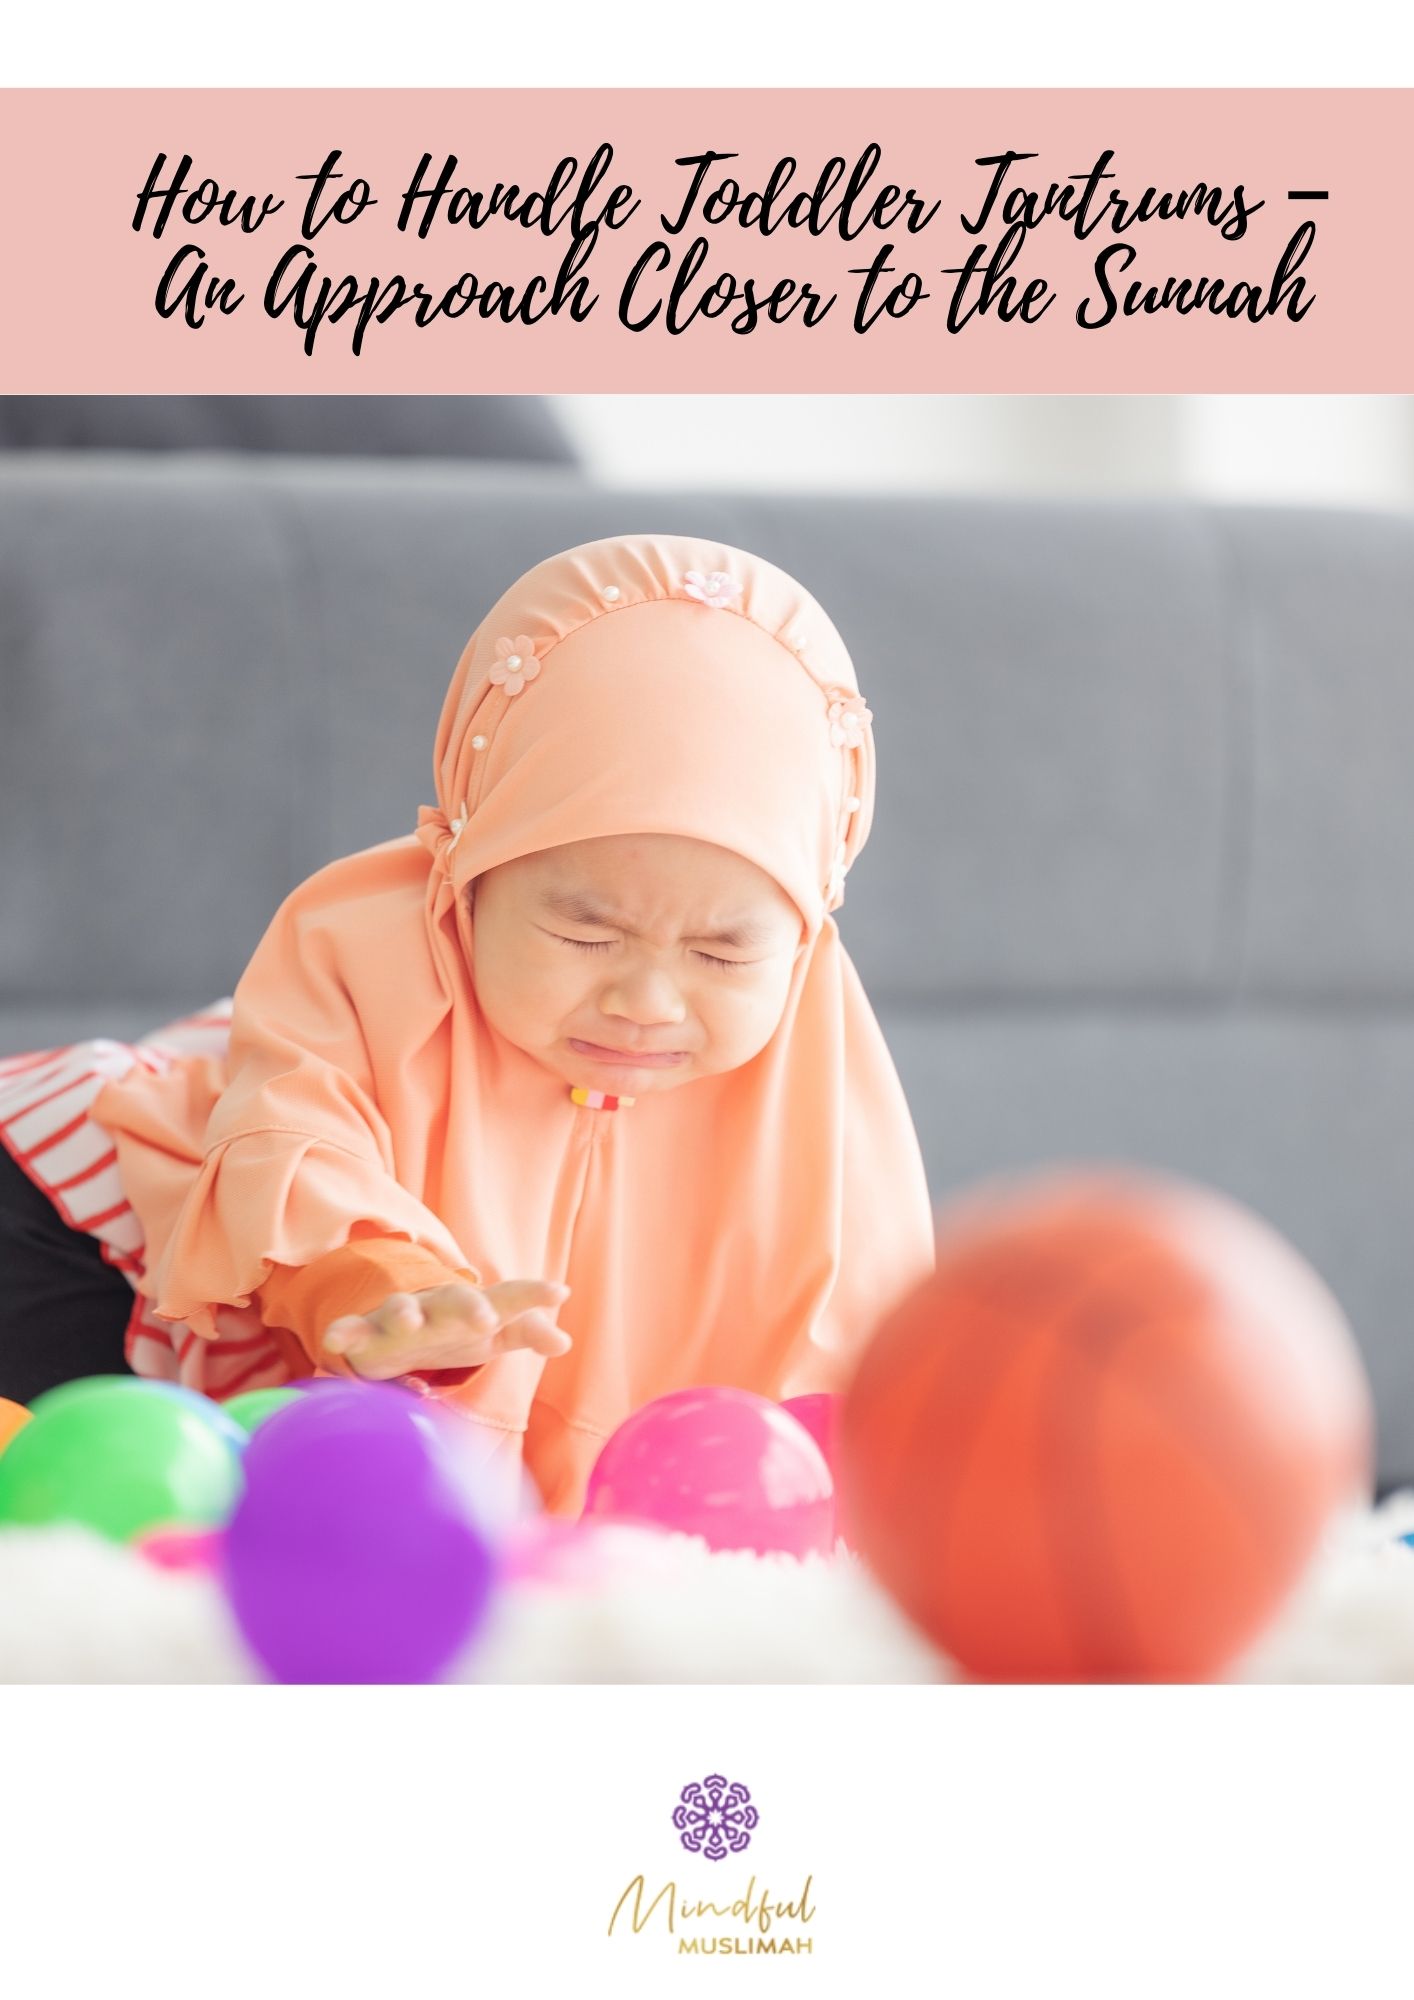 How to Handle Toddler Tantrums